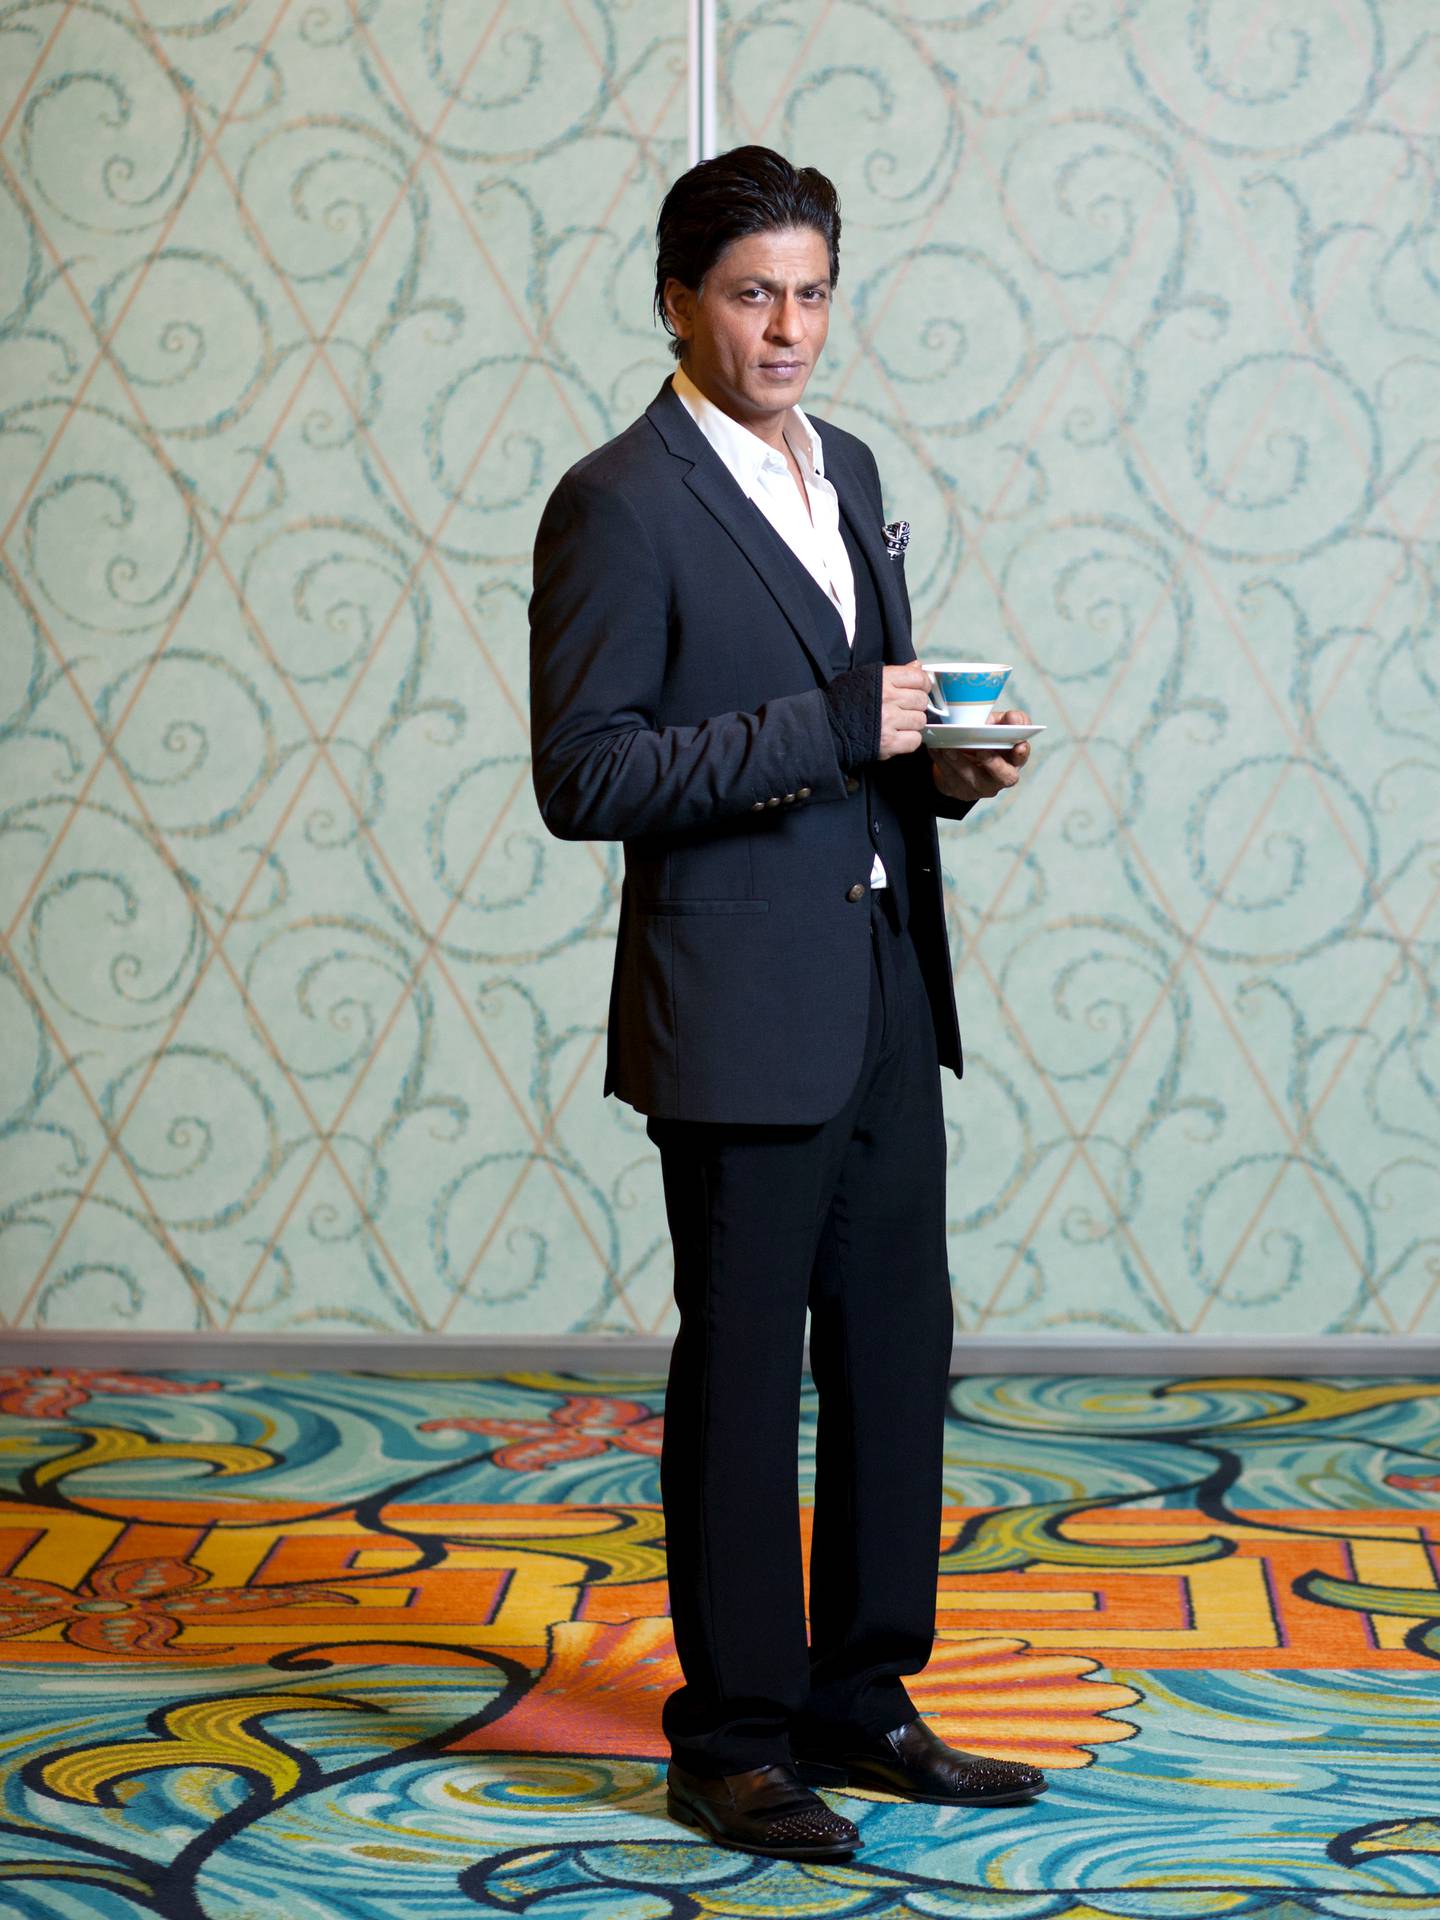 September 18, 2013 - Dubai, UAE - *General Caption* Bollywood star Shah Rukh Khan (also Shahrukh Khan) is photographed backstage at Atlantis after promoting his new film Chennai Express. Khan is in Dubai filming his new film Happy New Year.Photos by Clint McLean for The NationalArts&LifeCommissioning editor: Olga CamachoWriter: Christine Iyer